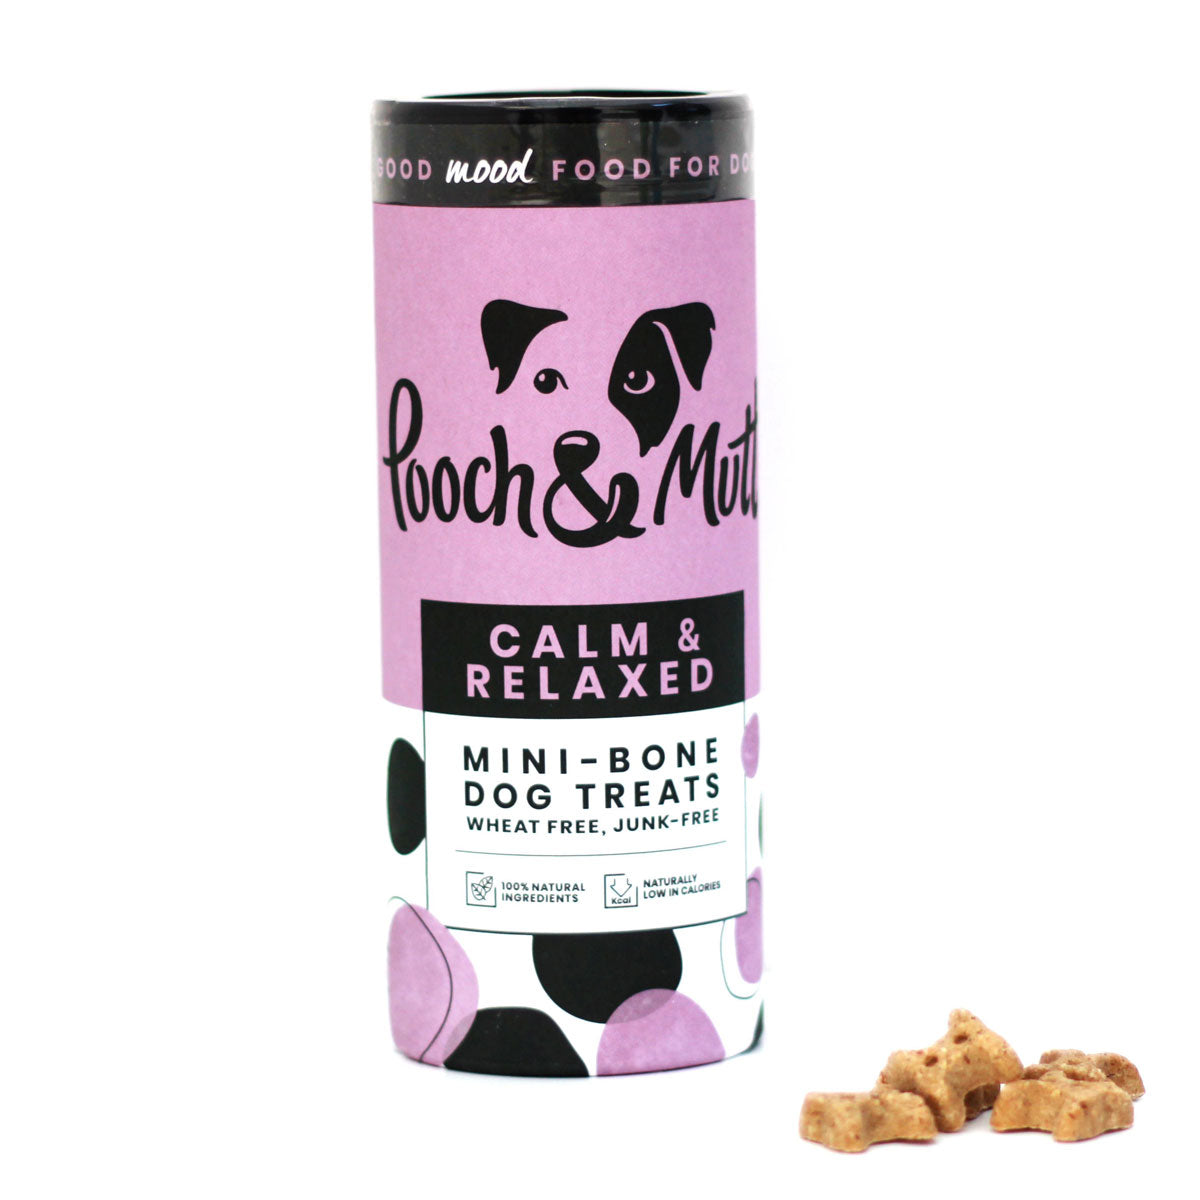 Mini-bone calm and relaxed dog treats 125g by Pooch & Mutt